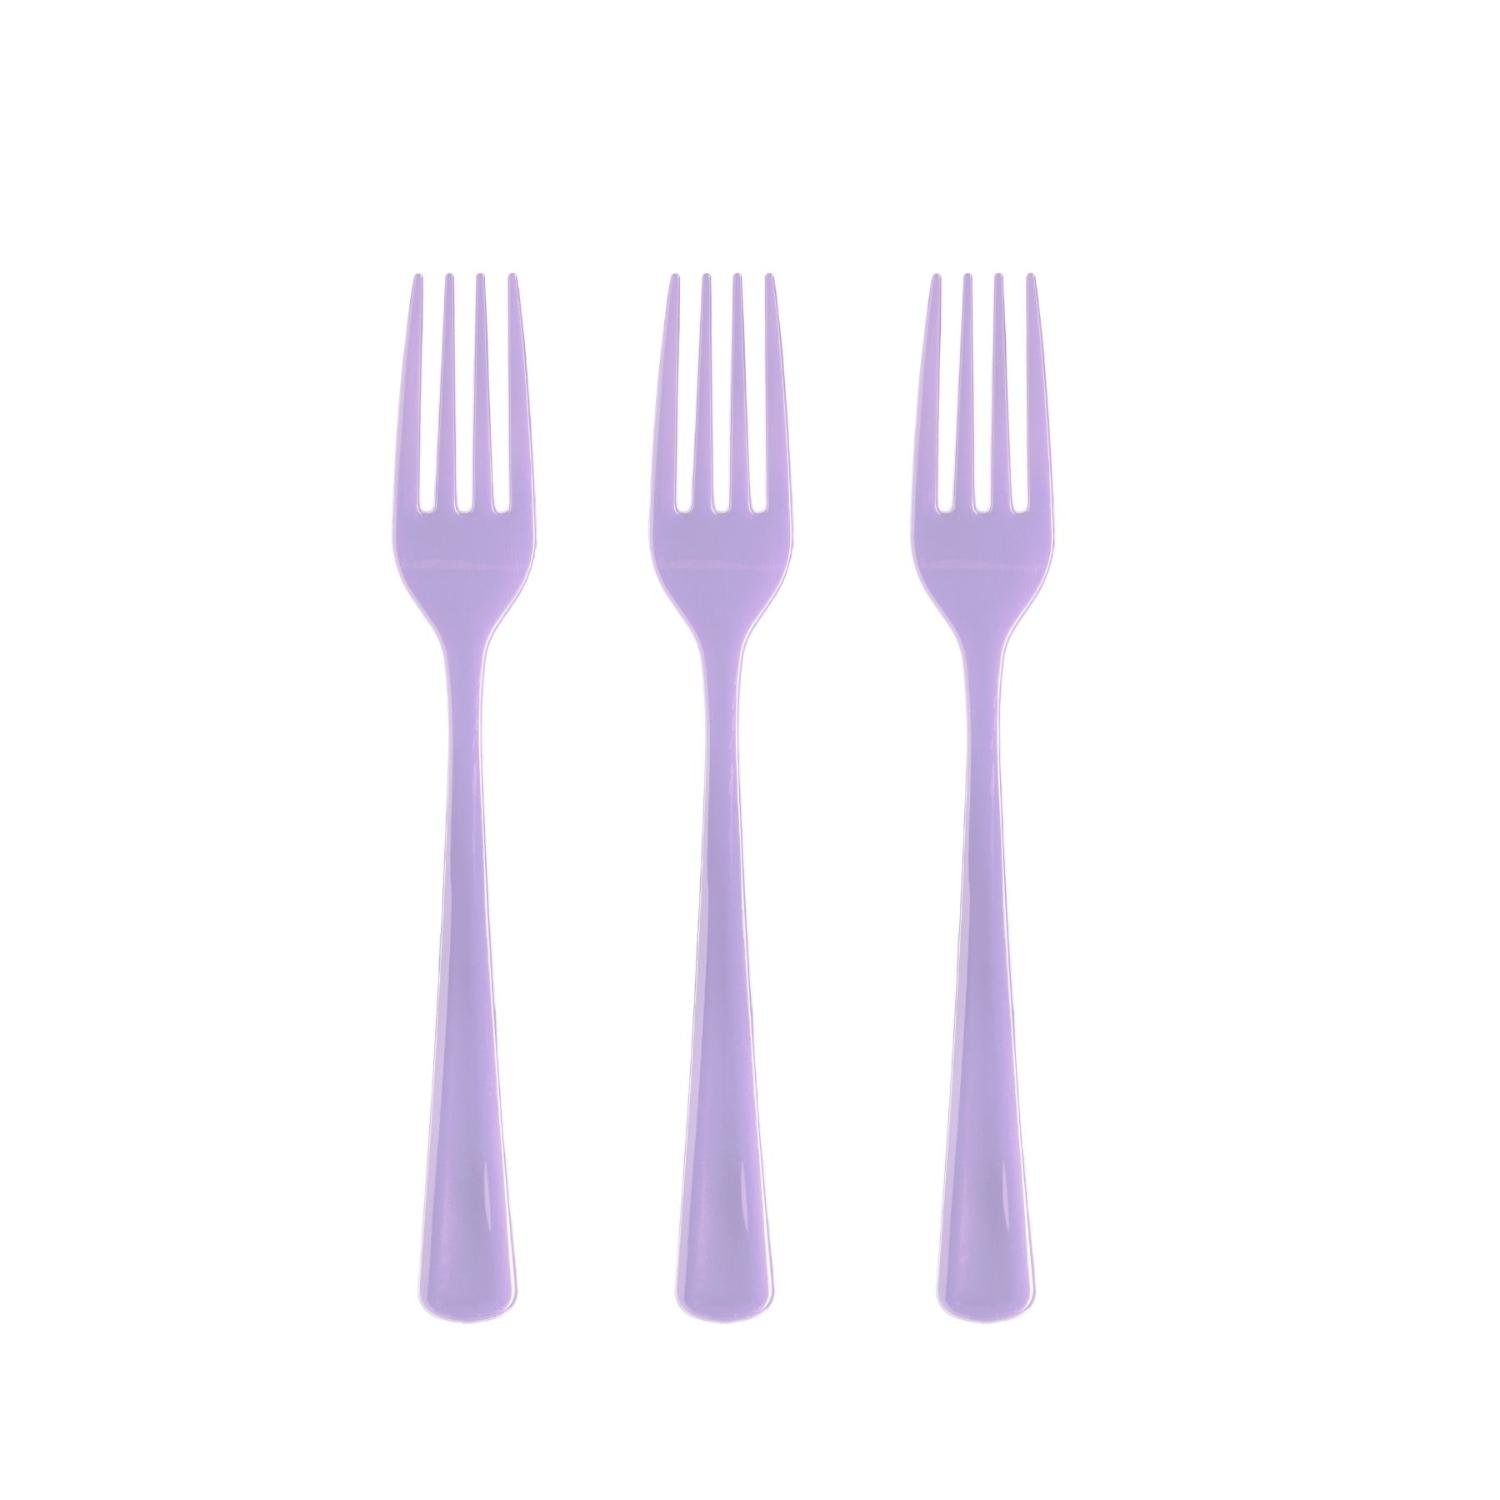 Heavy Duty Lavender Plastic Forks - 50 Ct.